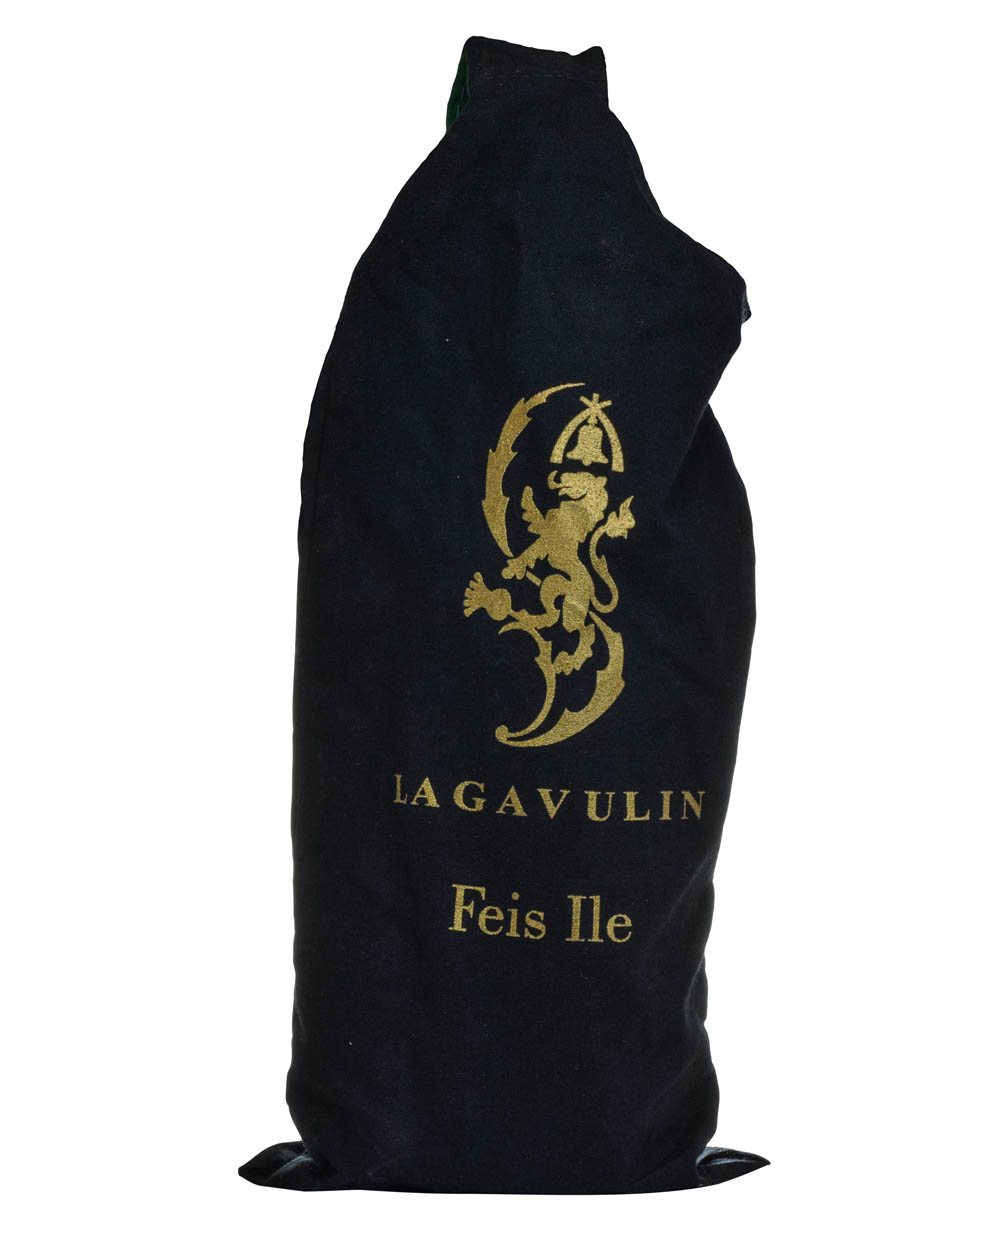 Lagavulin 16 Years Old Feis Ile 2017 Bag Musthave Malts MHM